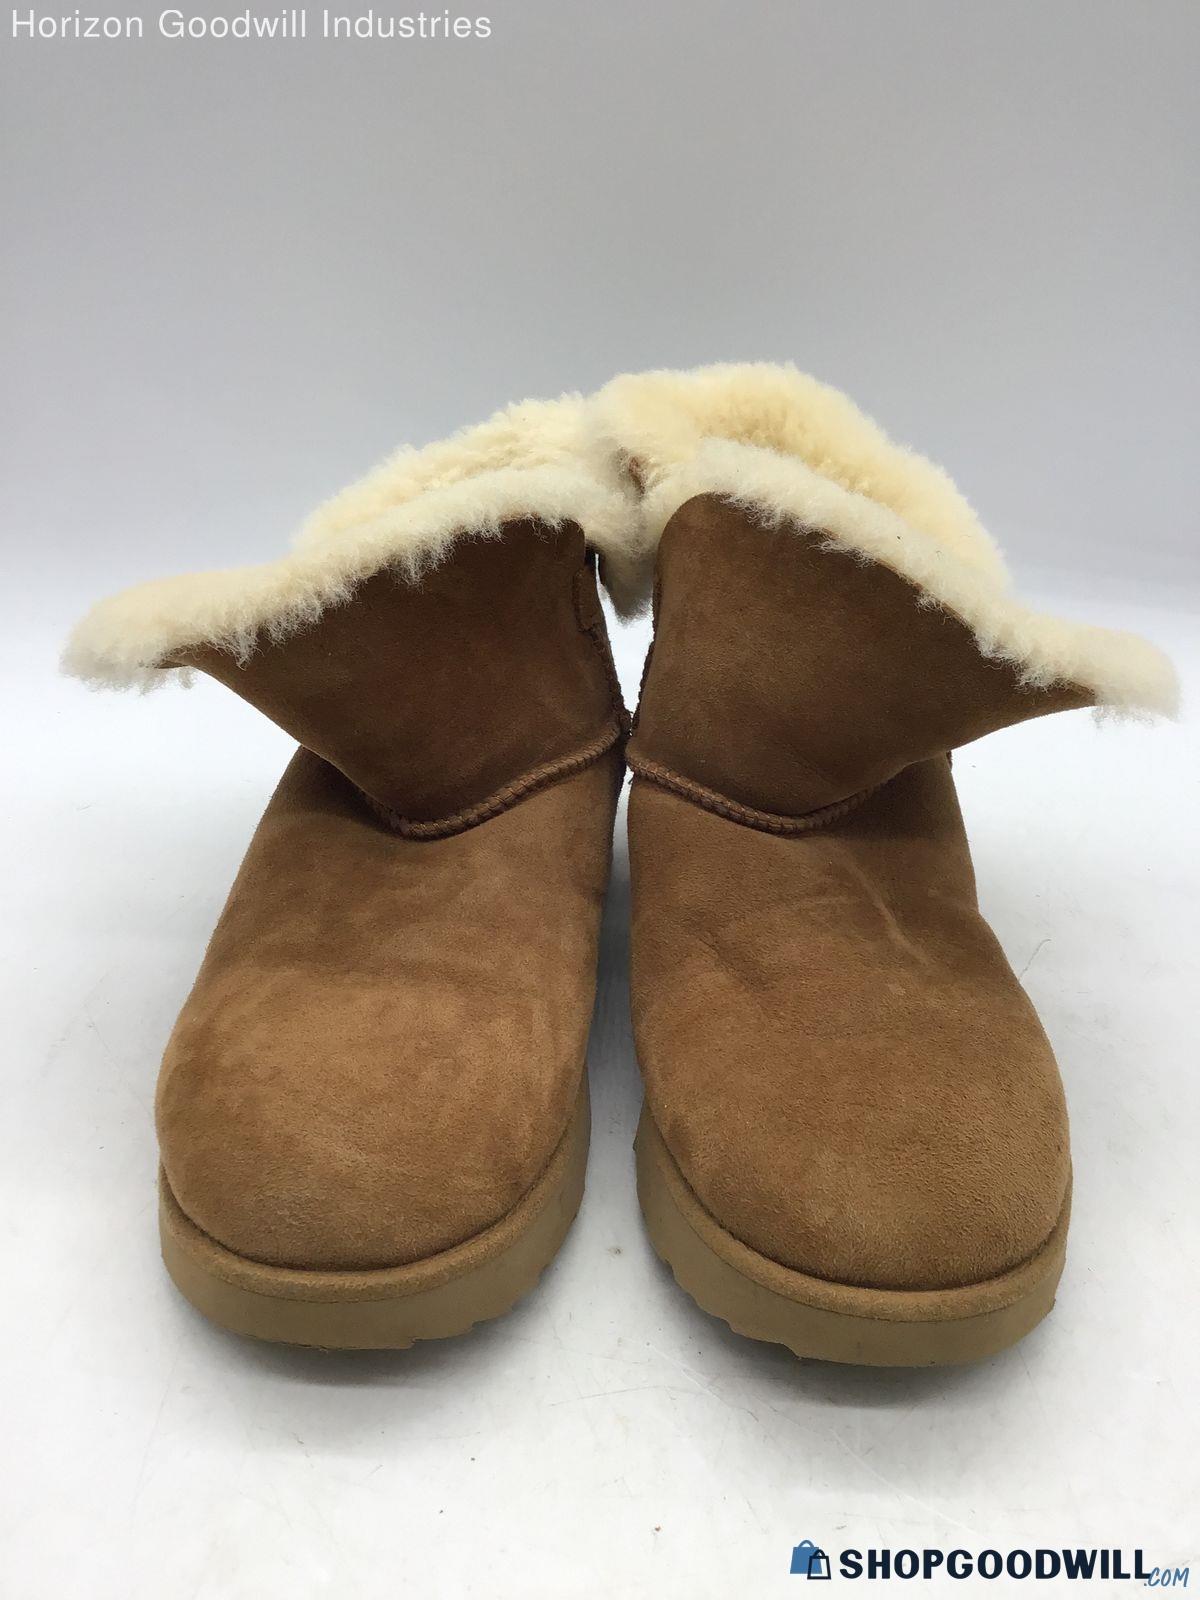 Used Ugg Shoes Mini Uggs Boots Cream Tan Brown Leather Faux Fur Women's ...